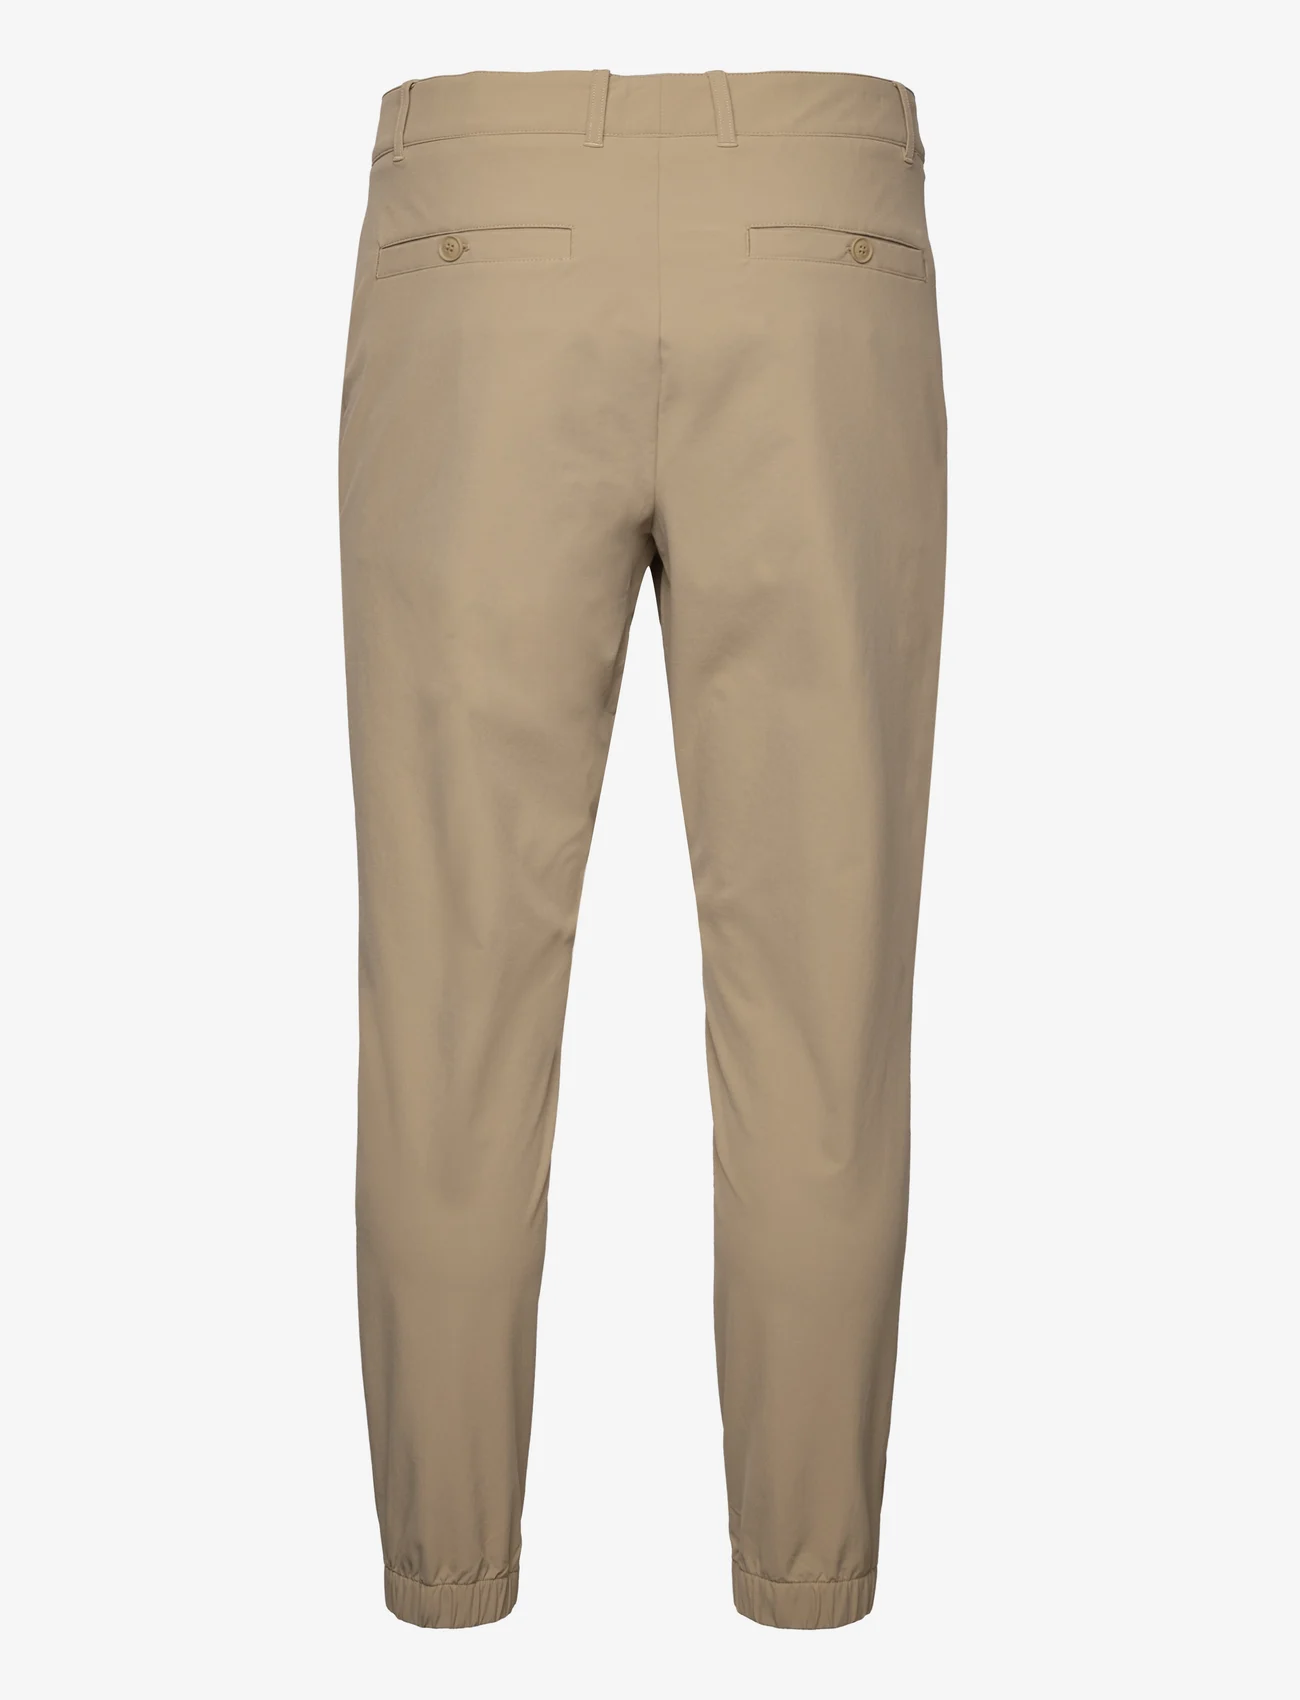 Lacoste Trousers - Casual trousers - Boozt.com